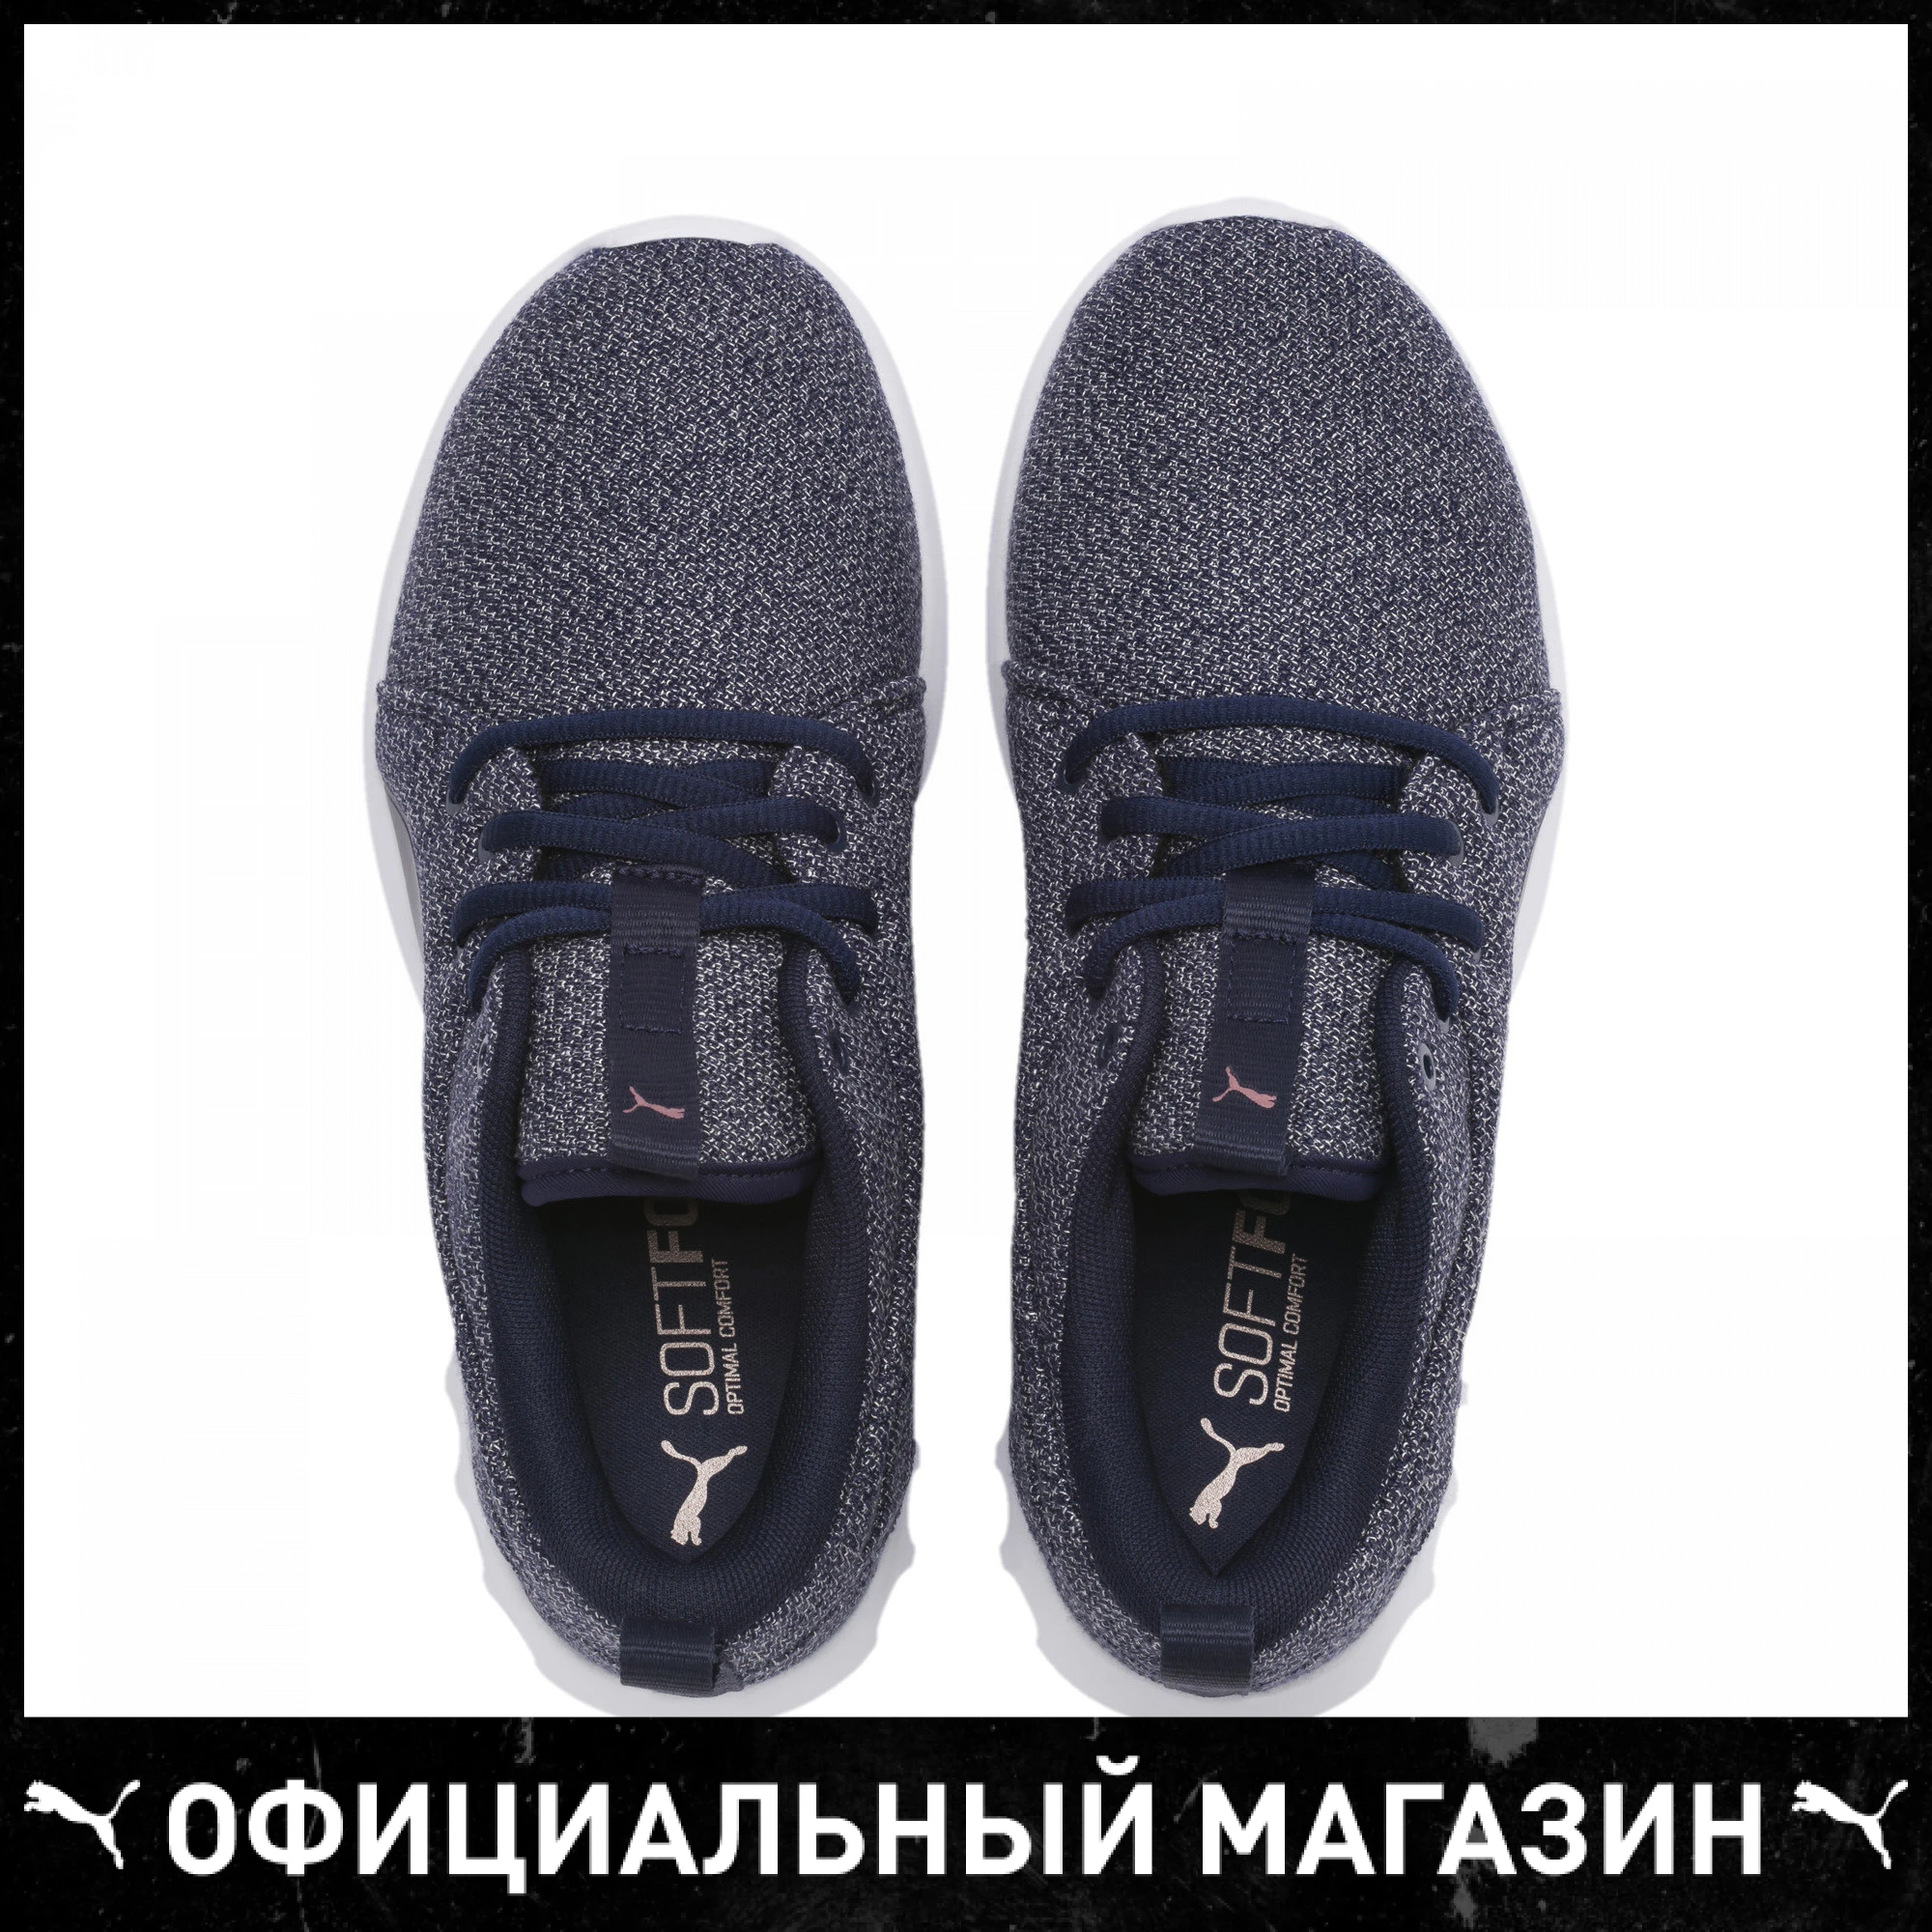 Sneakers PUMA Carson 2 Knit NM Wns Women's sports shoes for walking and runnin пума cougar Puma puma _ - AliExpress Mobile